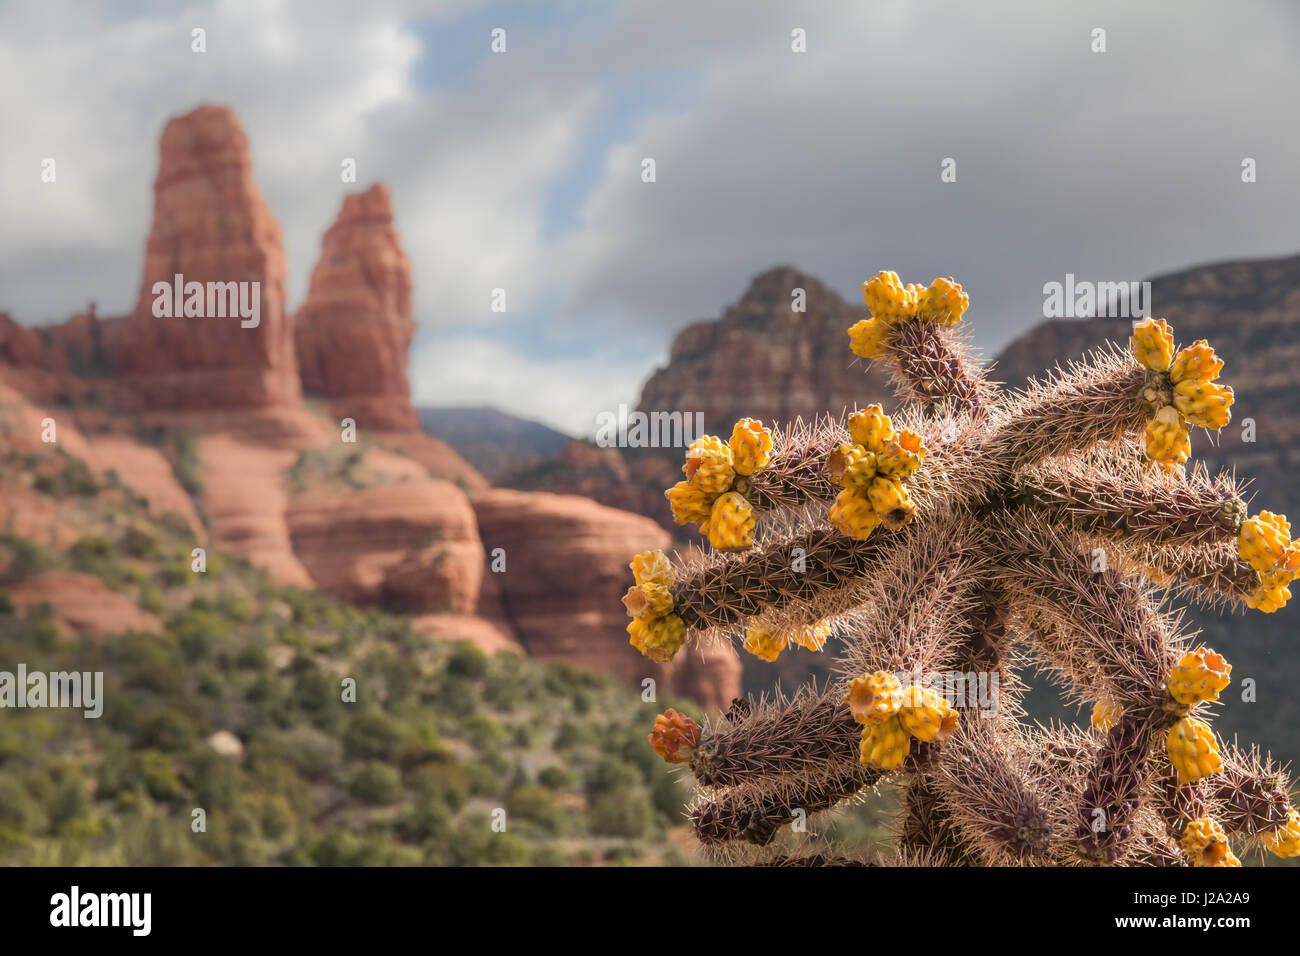 Reddish-brown spires and cliffs of Sedona's famed red rocks form the background for a spikey cholla cactus with bright orange fruit Stock Photo